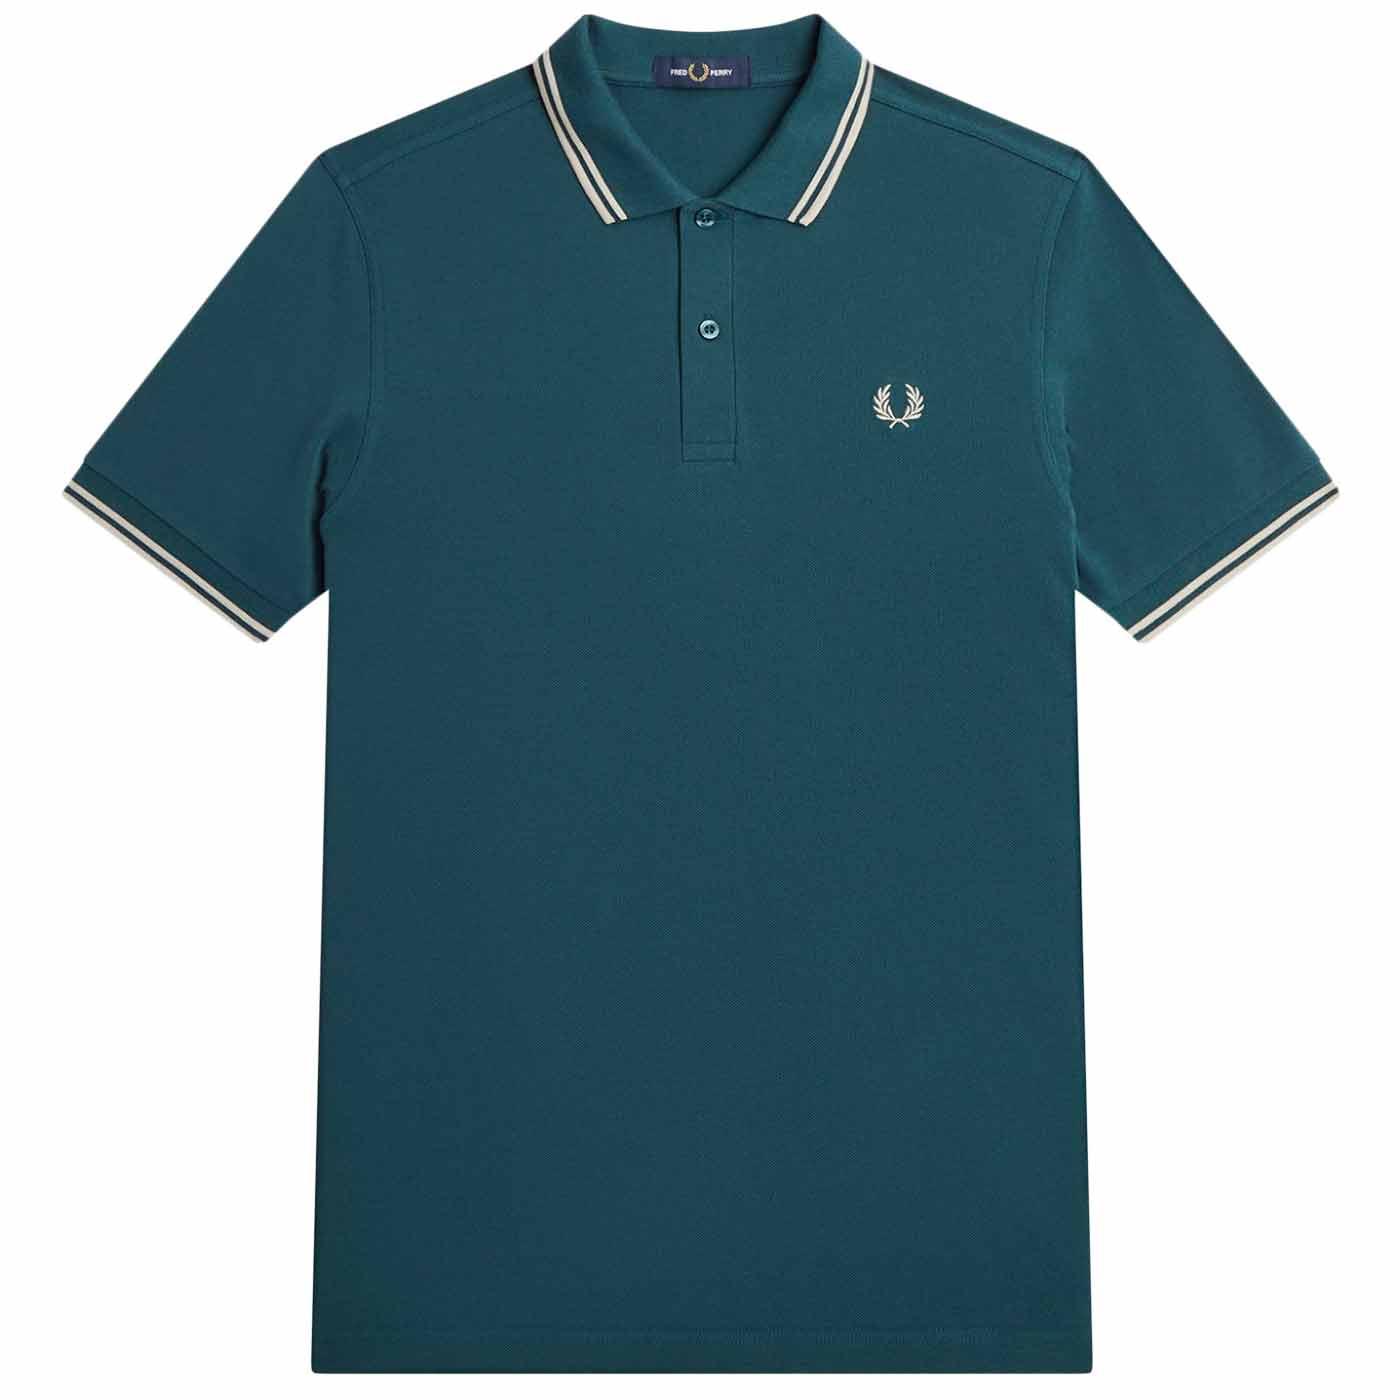 FRED PERRY M3600 Mod Twin Tipped Polo Shirt PB/LO